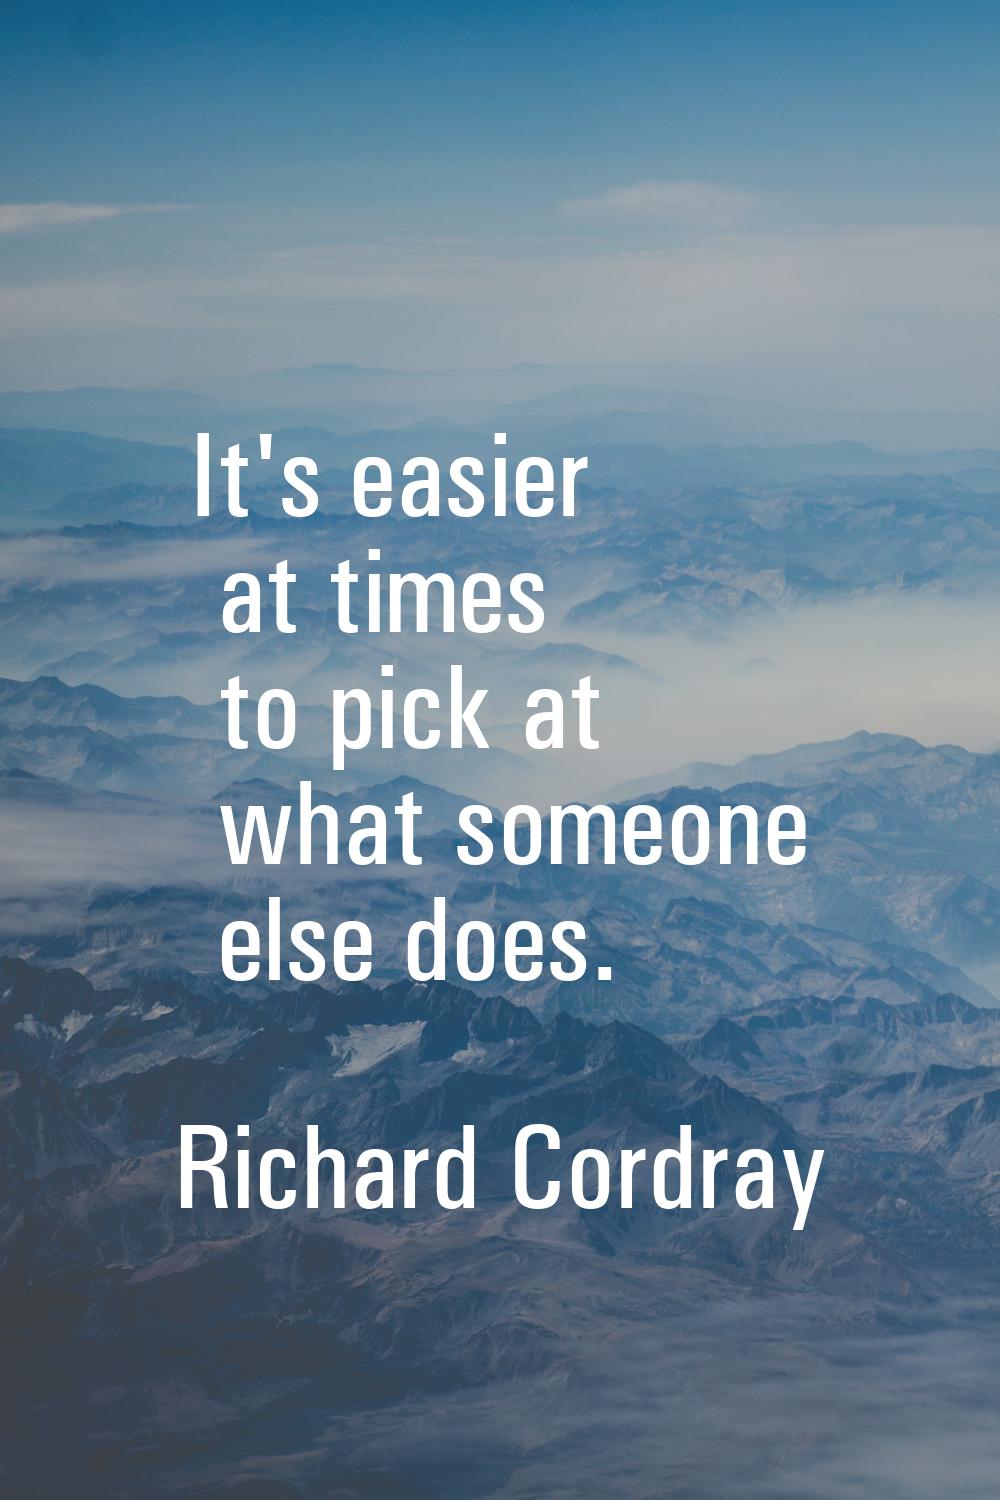 It's easier at times to pick at what someone else does.